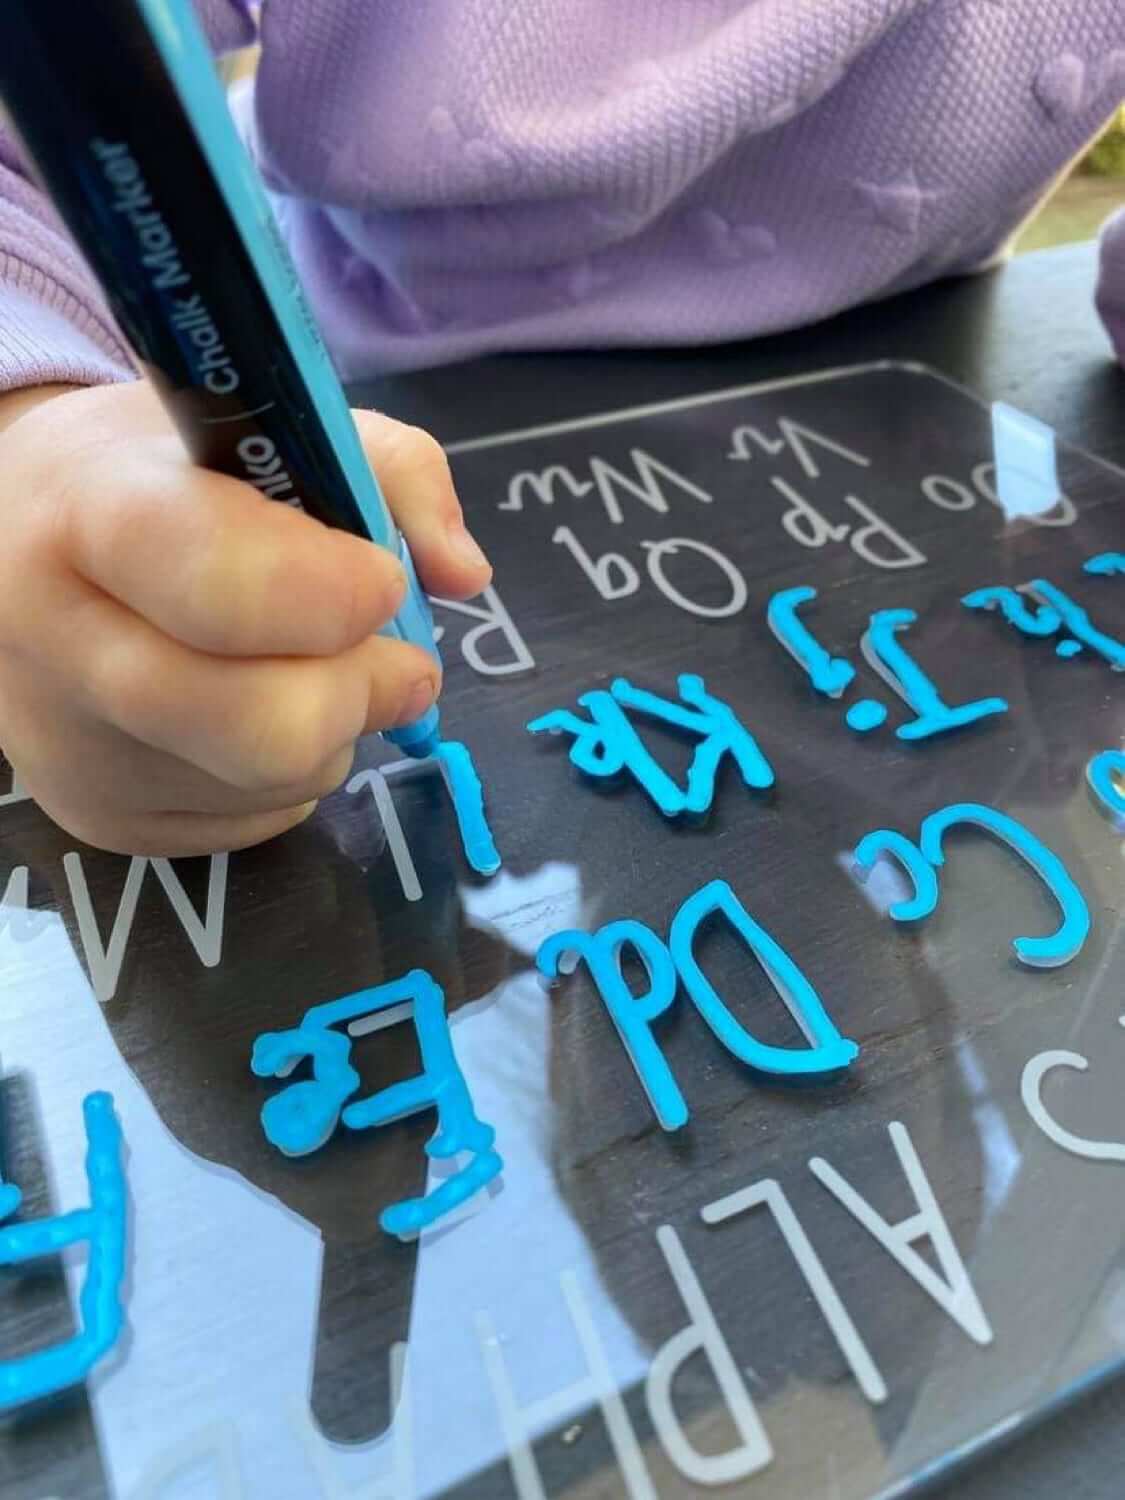 Personalised Alphabet Tracing Board, Child Learning & Development